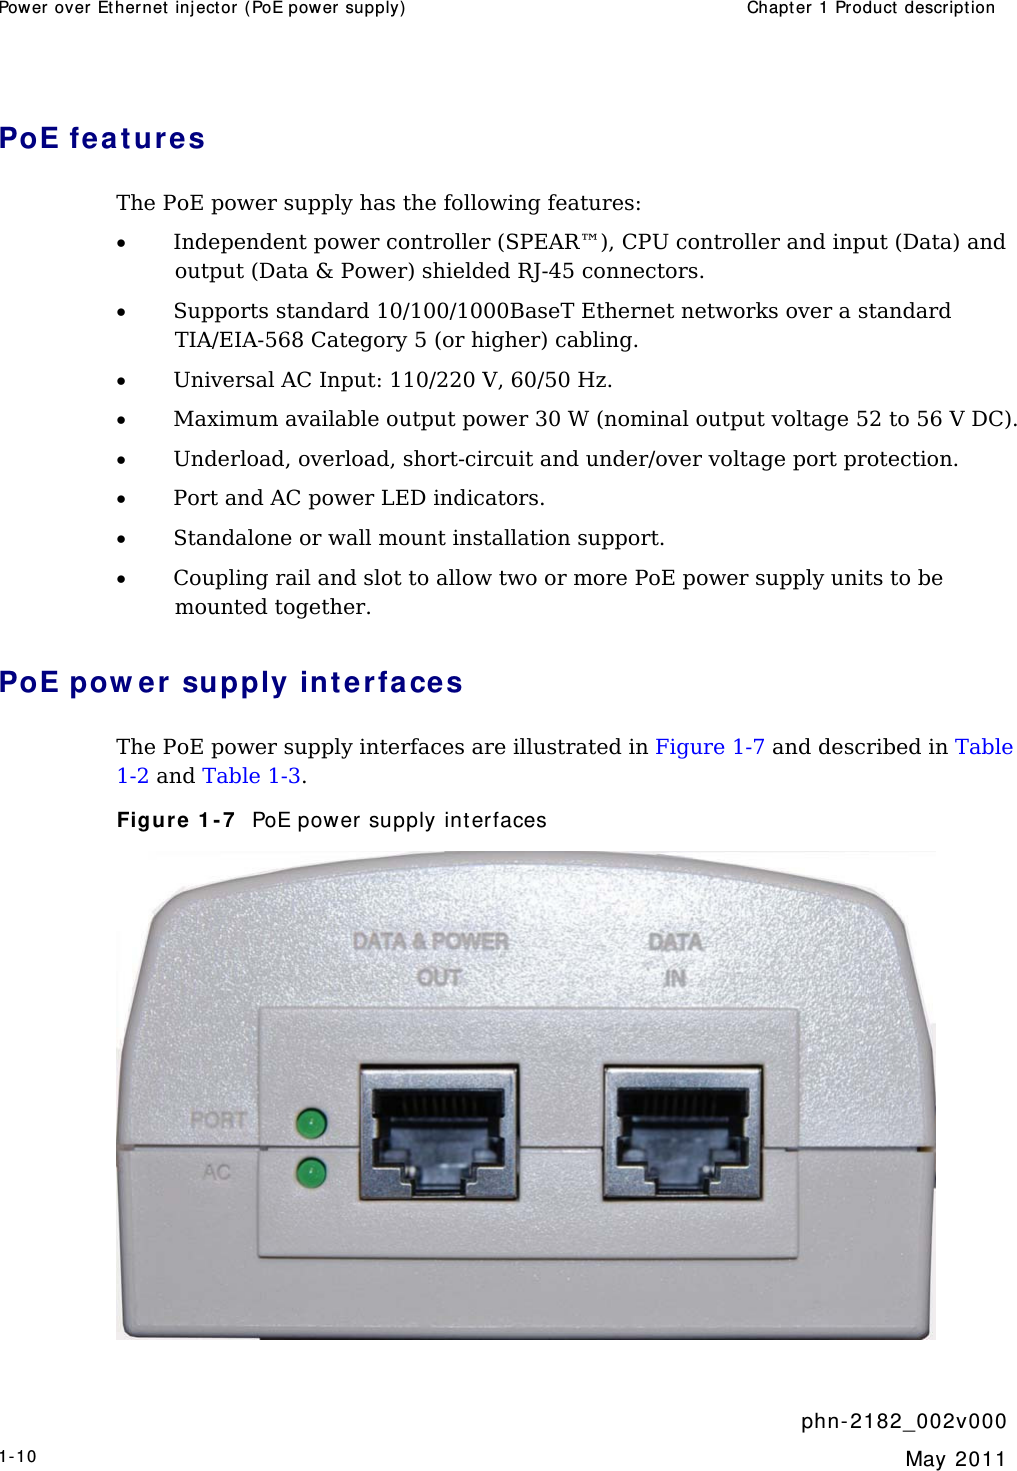 Power over  Ether net  inj ector ( PoE power supply)  Chapt er 1 Product descr ipt ion     phn- 2 182_002v 000 1-10  May 2011  PoE fea t ures The PoE power supply has the following features: • Independent power controller (SPEAR™), CPU controller and input (Data) and output (Data &amp; Power) shielded RJ-45 connectors. • Supports standard 10/100/1000BaseT Ethernet networks over a standard TIA/EIA-568 Category 5 (or higher) cabling. • Universal AC Input: 110/220 V, 60/50 Hz. • Maximum available output power 30 W (nominal output voltage 52 to 56 V DC). • Underload, overload, short-circuit and under/over voltage port protection. • Port and AC power LED indicators. • Standalone or wall mount installation support. • Coupling rail and slot to allow two or more PoE power supply units to be mounted together. PoE pow er  supply int erfaces The PoE power supply interfaces are illustrated in Figure 1-7 and described in Table 1-2 and Table 1-3. Figure 1 - 7   PoE power supply interfaces  